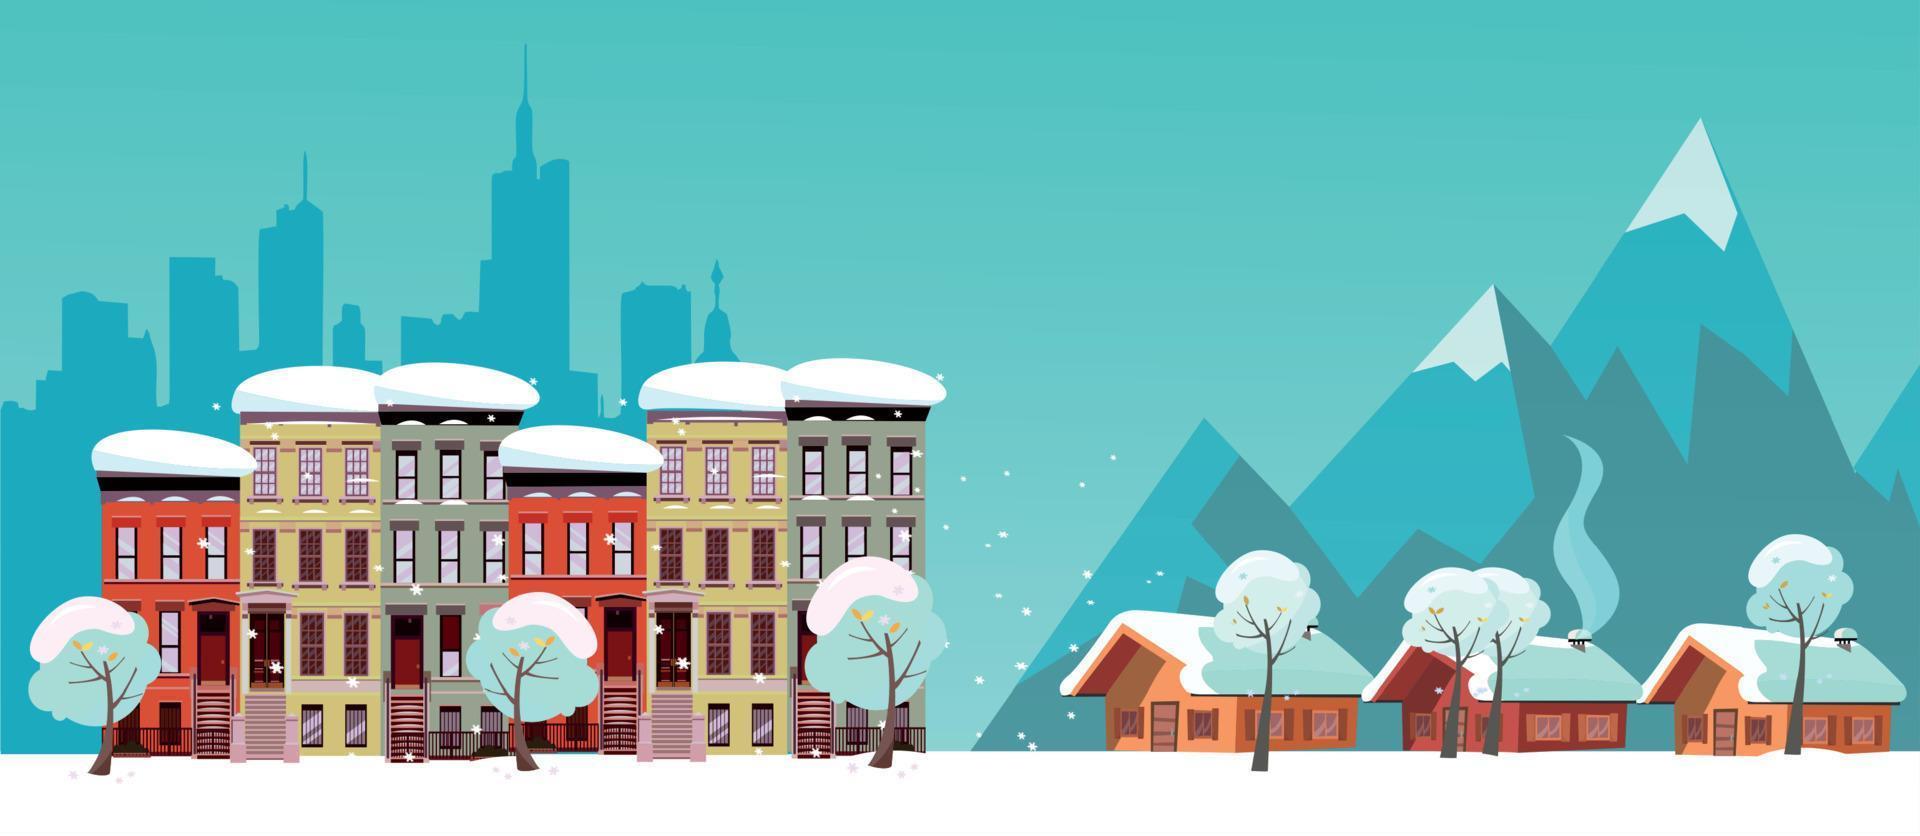 Winter Urban and Countryside Landscape. City Village Real Estate. Citiscape vs suburb. Urban landscape with three-story houses and suburb with private houses on background mountains. vector